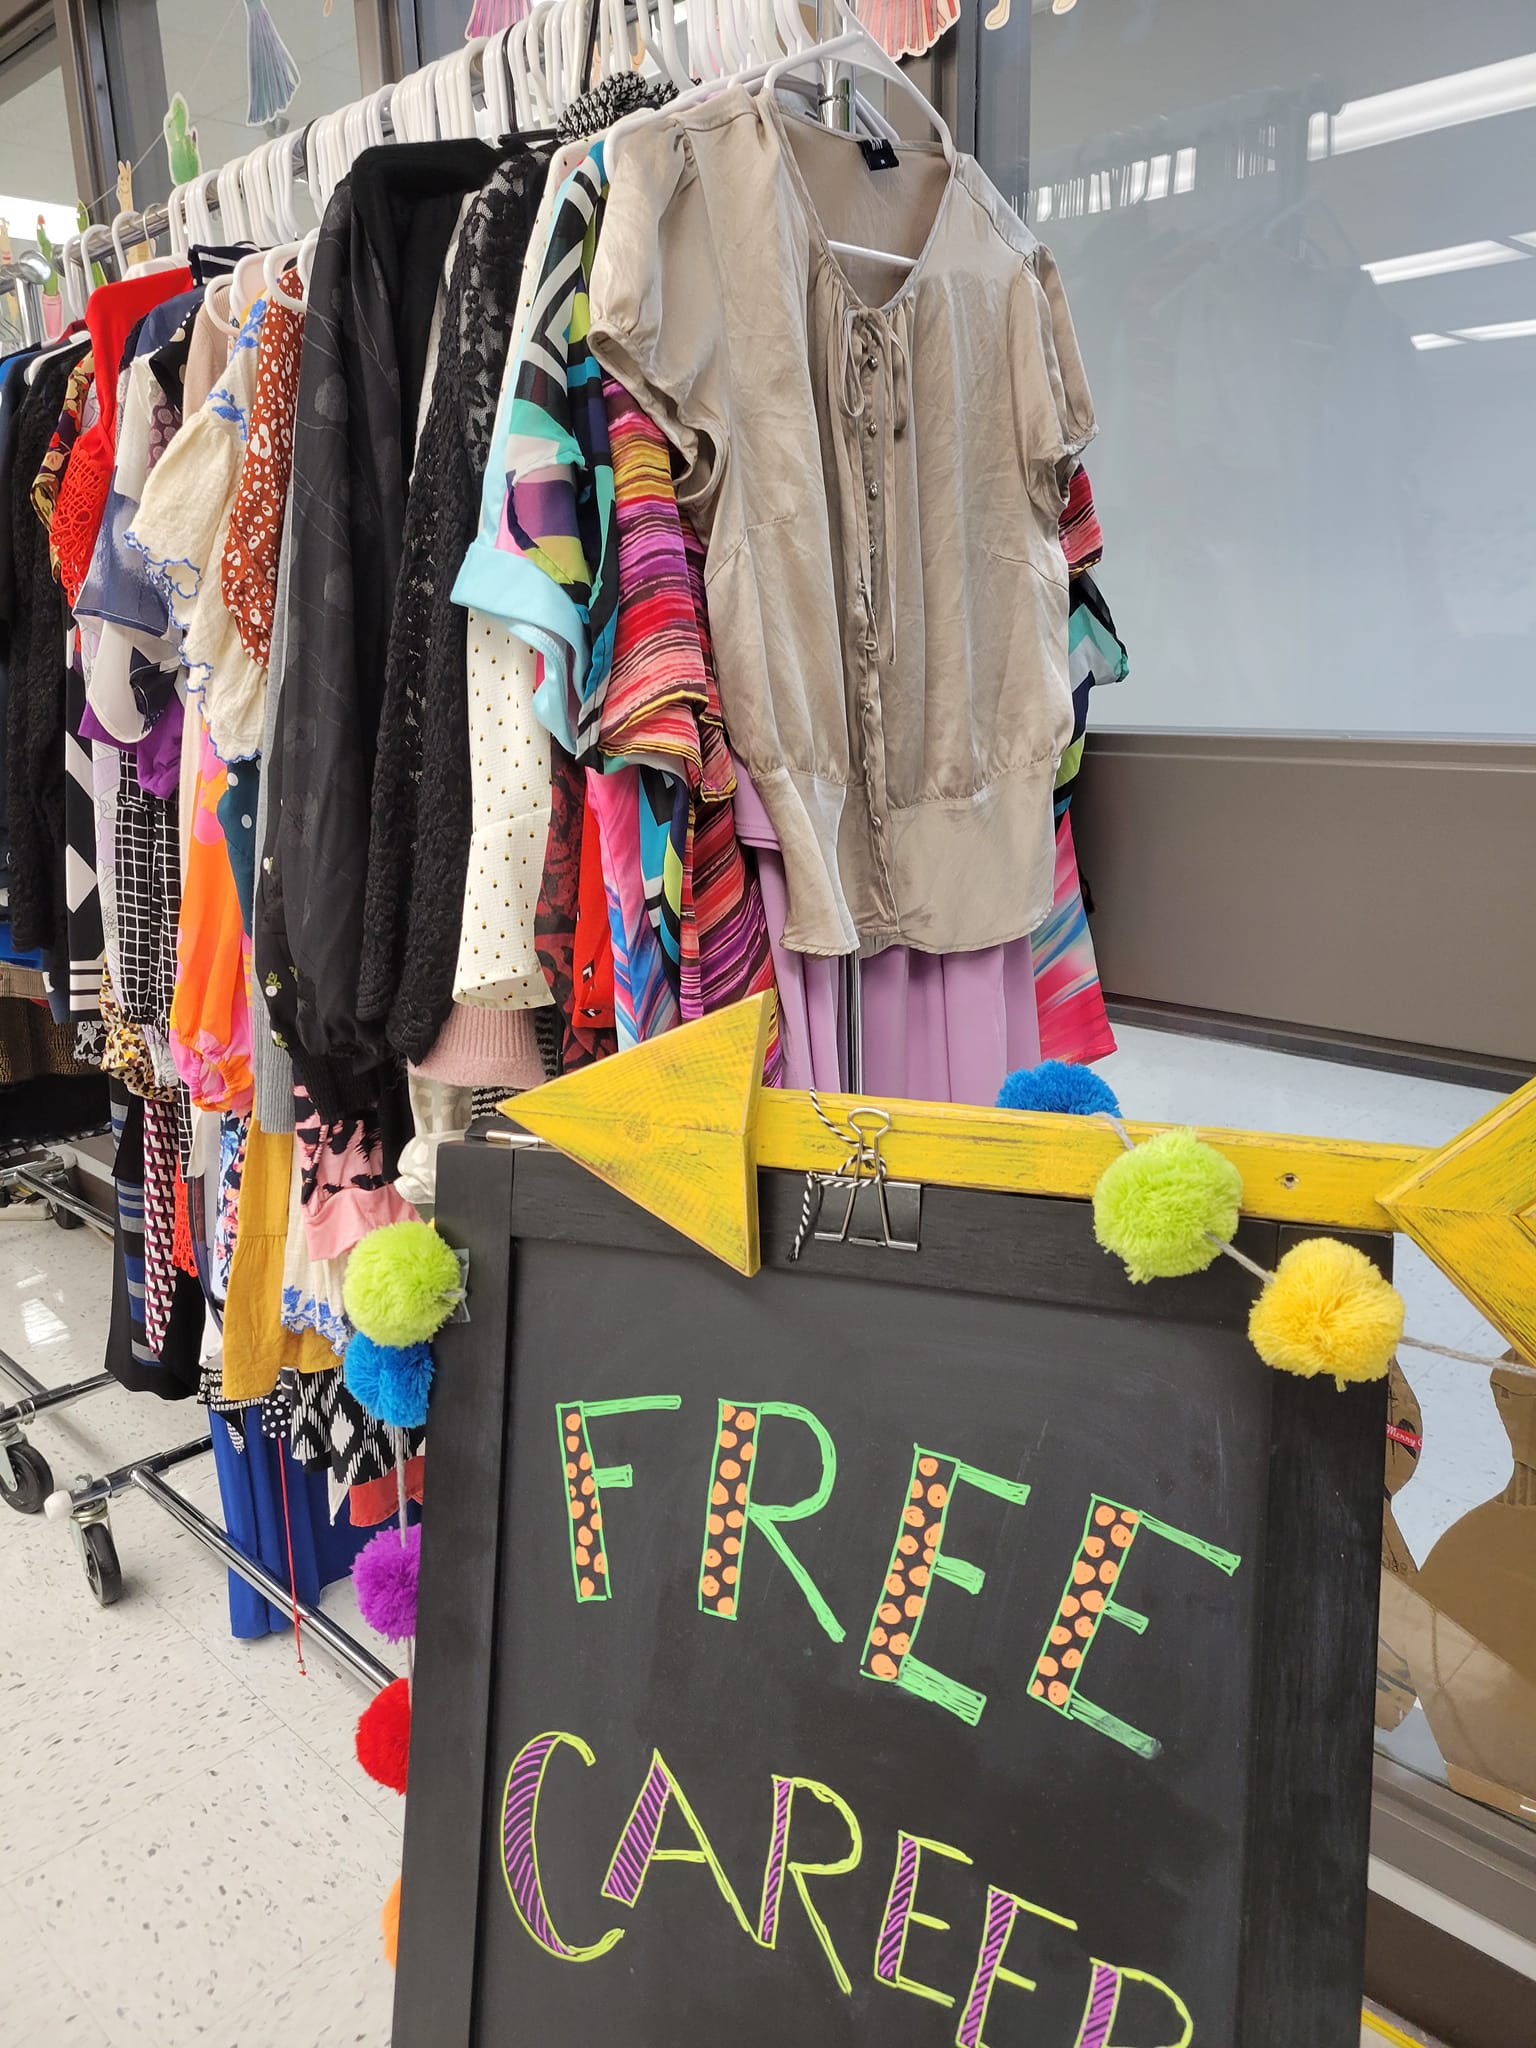 L&C’s Career Closet provides free professional clothing for students. The Career Closet is only one of the free services being offered to students at this month’s Career Readiness Day. Submitted photo.